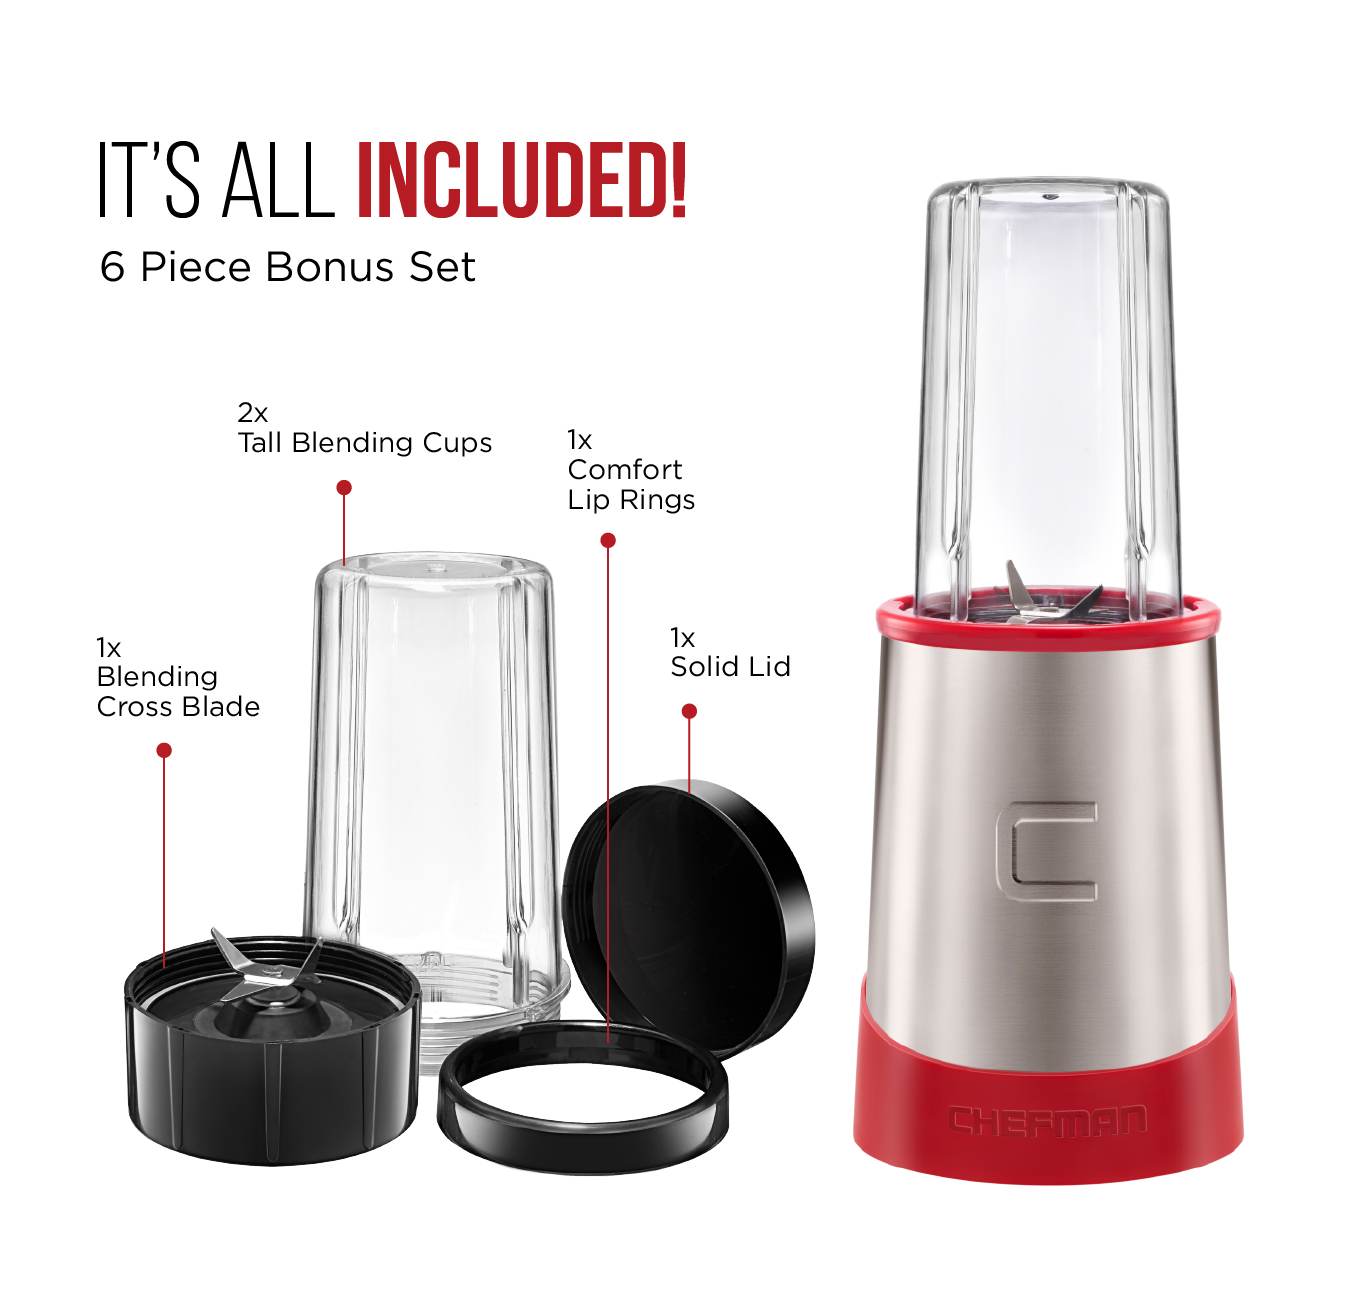 Chefman Ultimate Personal Smoothie Blender, Red - image 3 of 7